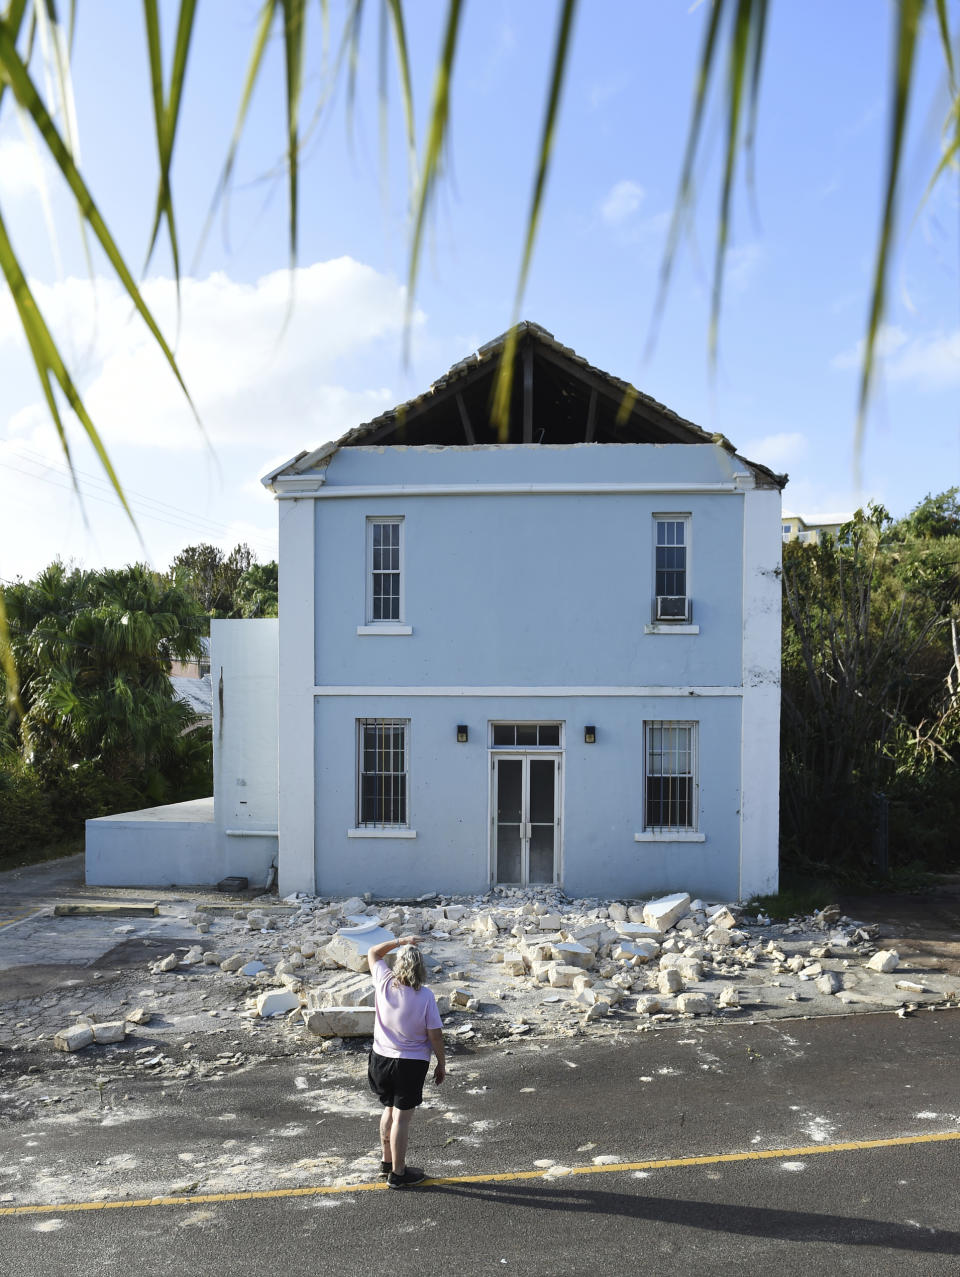 A woman looks up at a building damaged by Hurricane Humberto in Blue Hole Park, Bermuda, Thursday, Sept. 19, 2019. Humberto blew off rooftops, toppled trees and knocked out power but officials said Thursday that the Category 3 storm caused no reported deaths. (AP Photo/Akil J. Simmons)